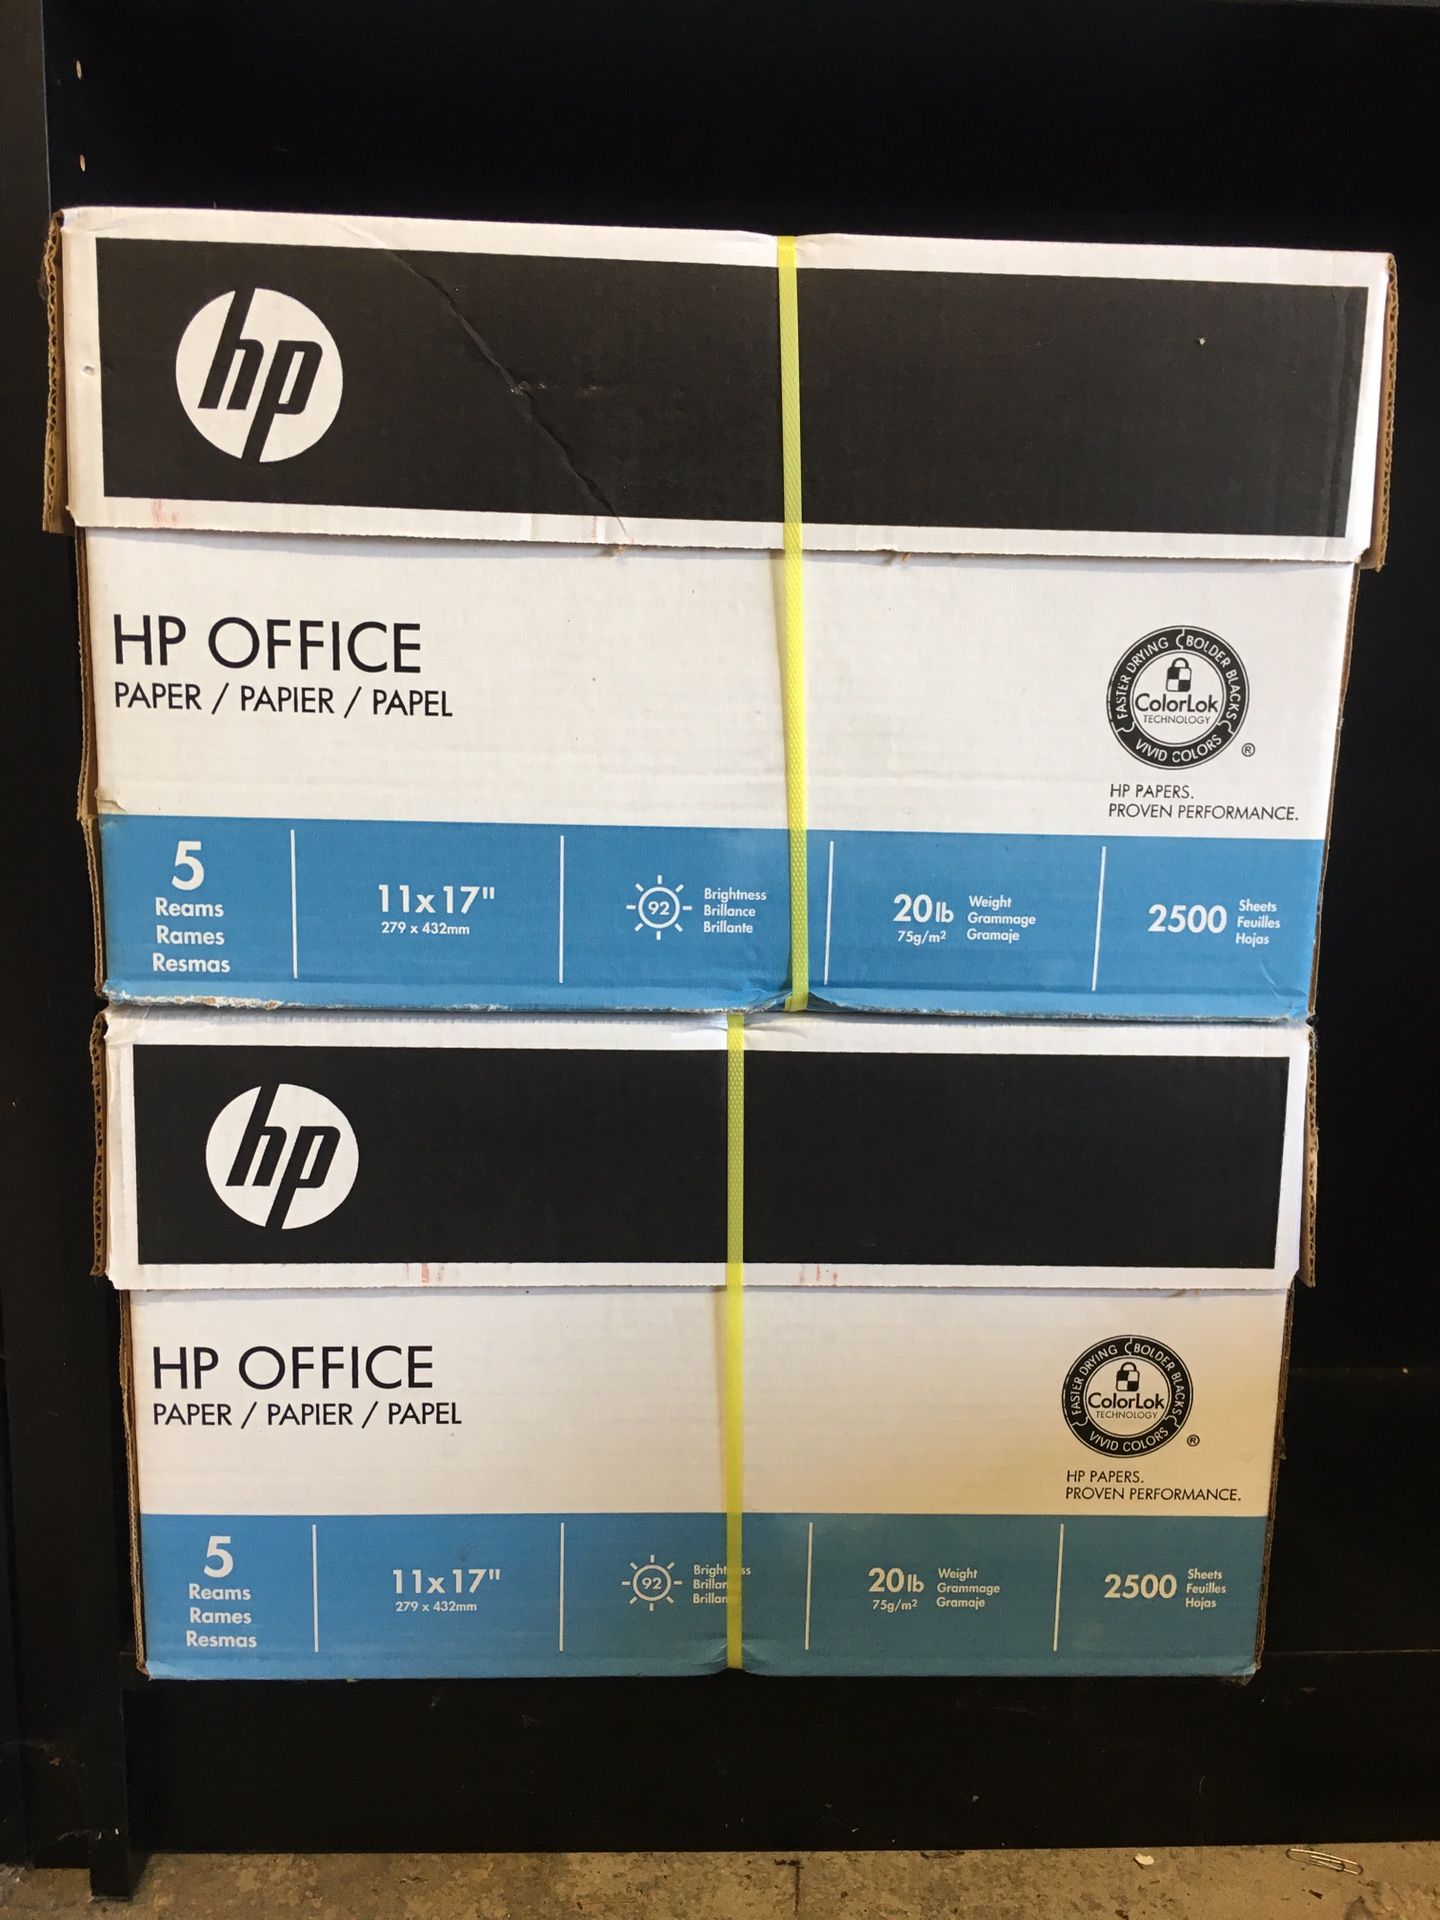 2 Cases of HP OFFICE 11 x 17” Paper